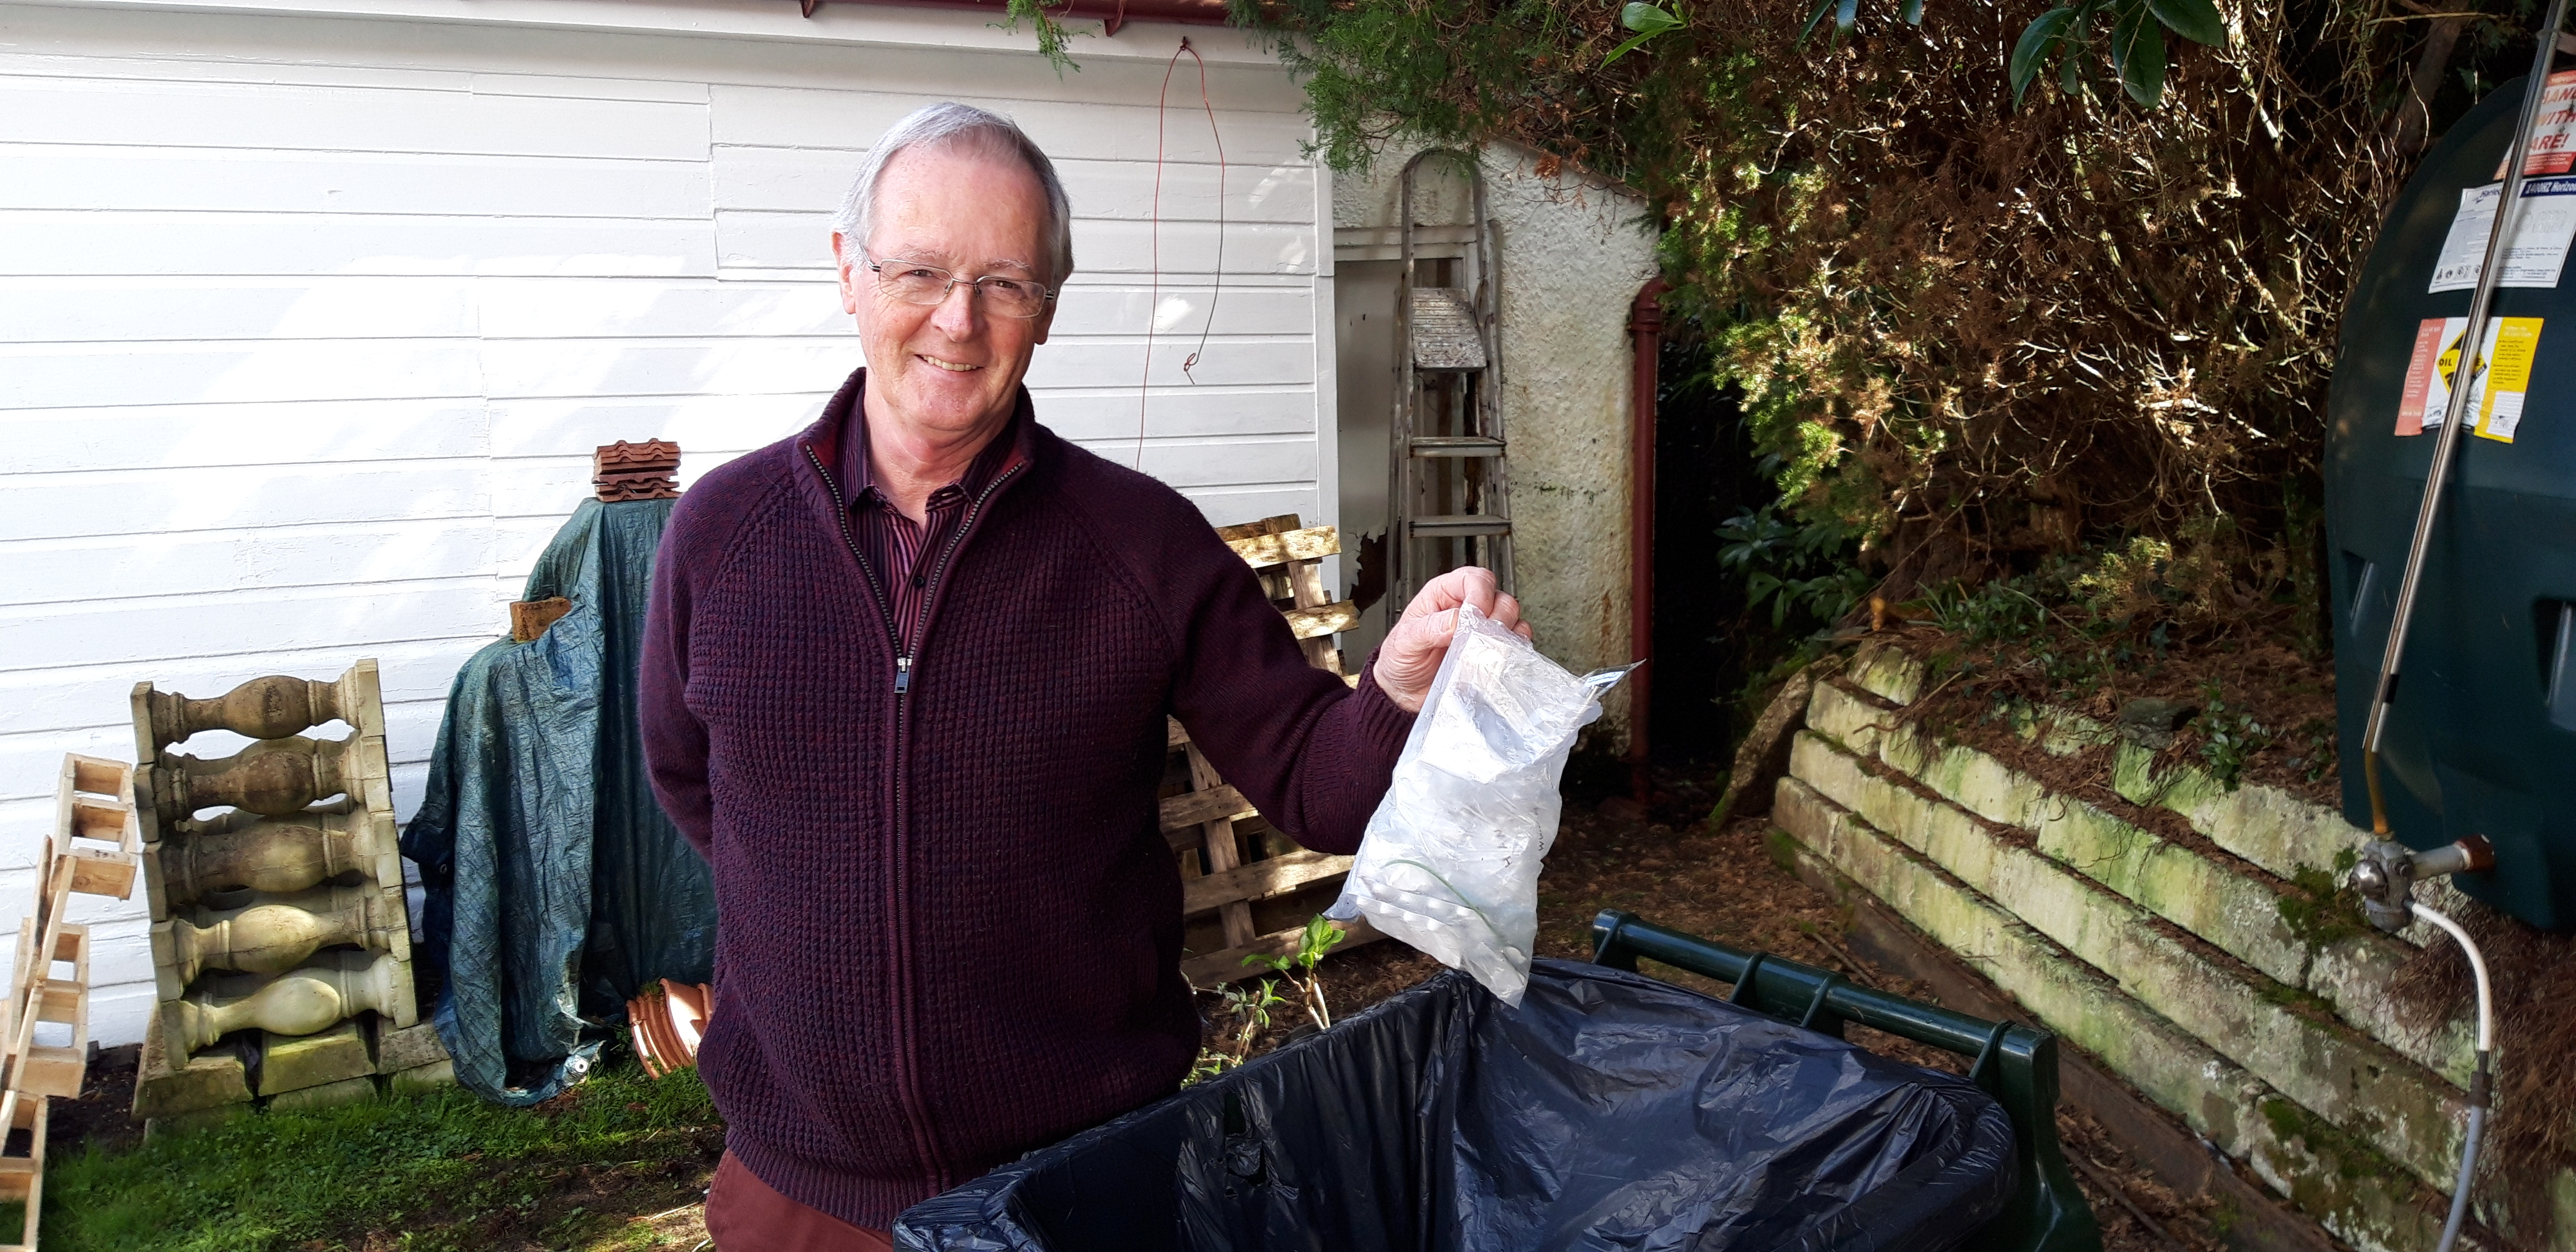 Councillor Allan Henderson wants people to take home their rubbish and put it in the bin.